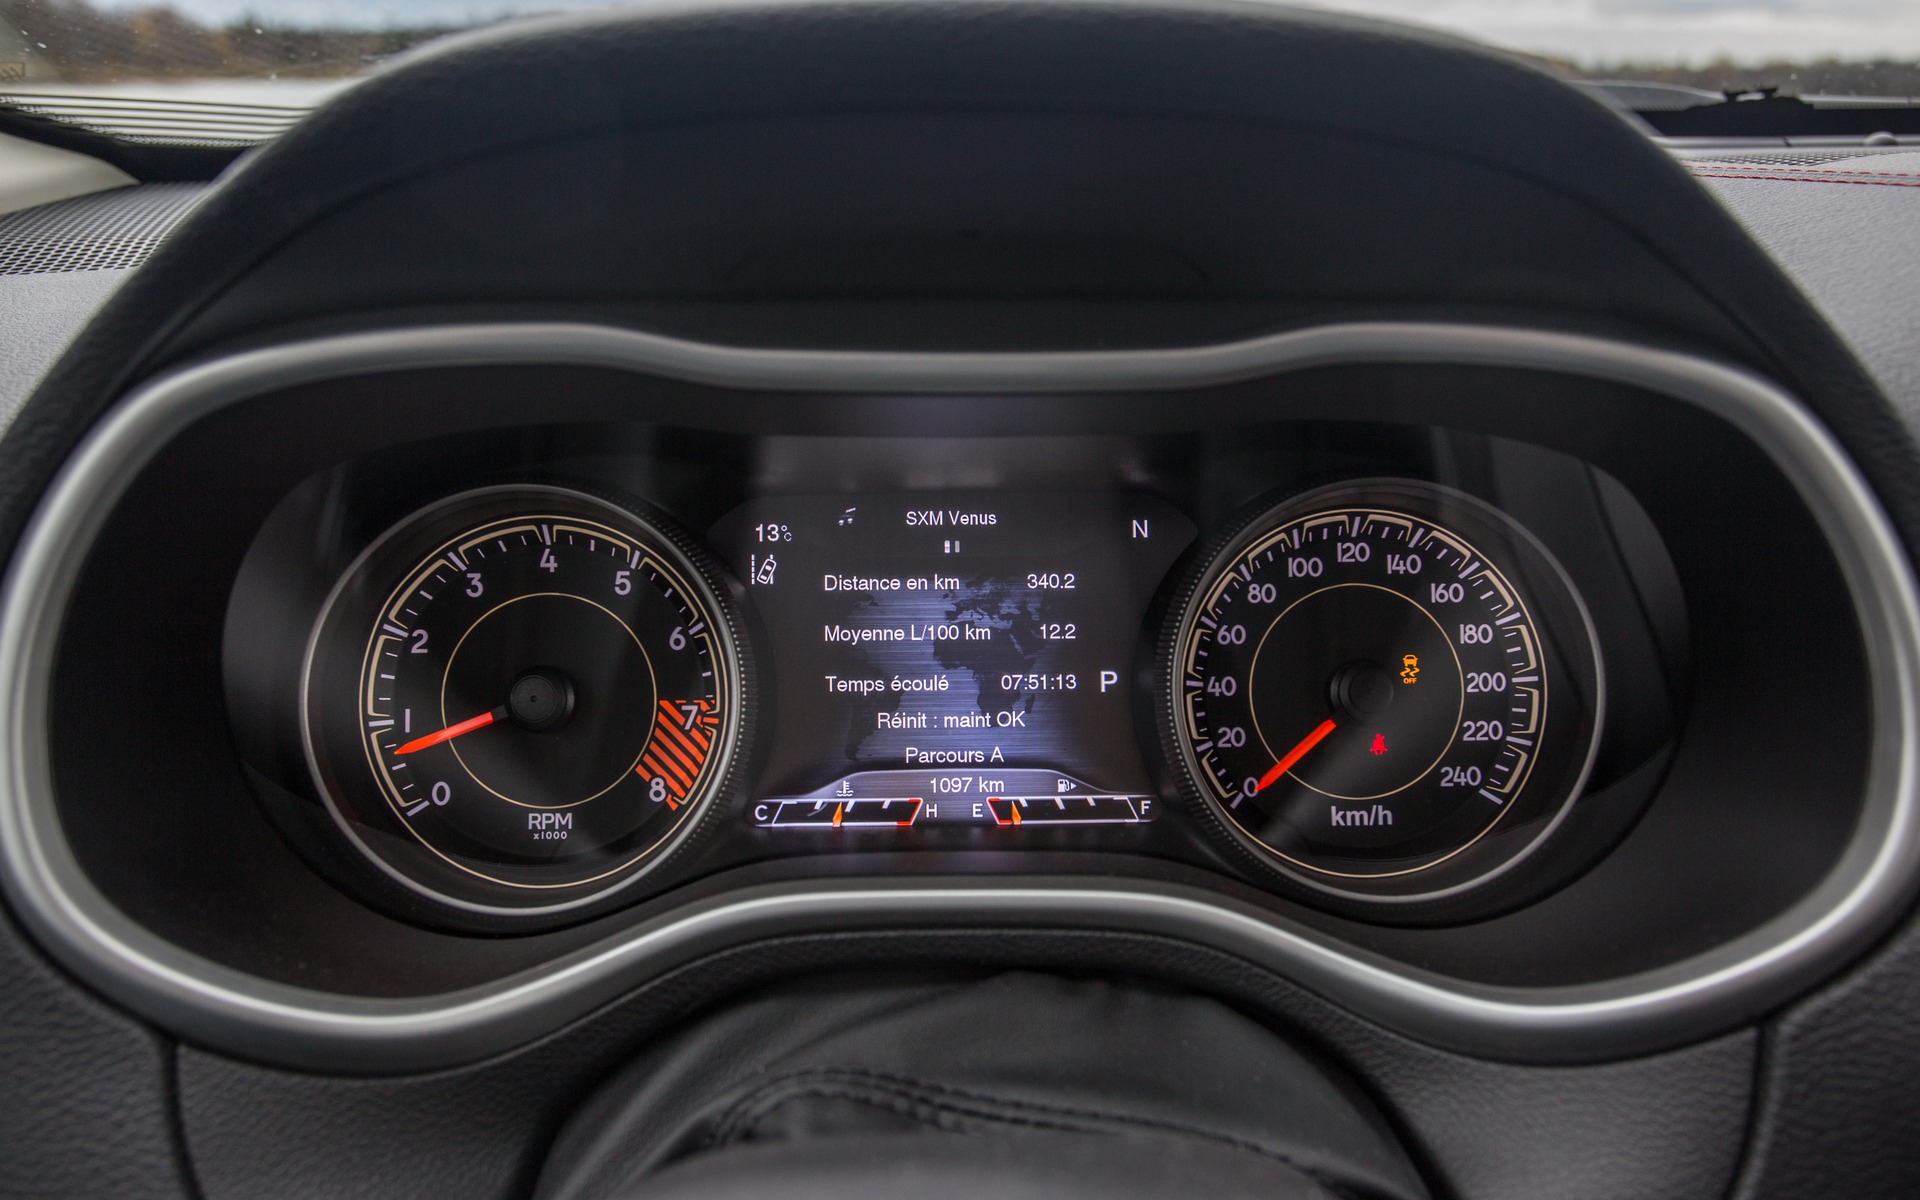 The Cherokee’s display can be completely configured.